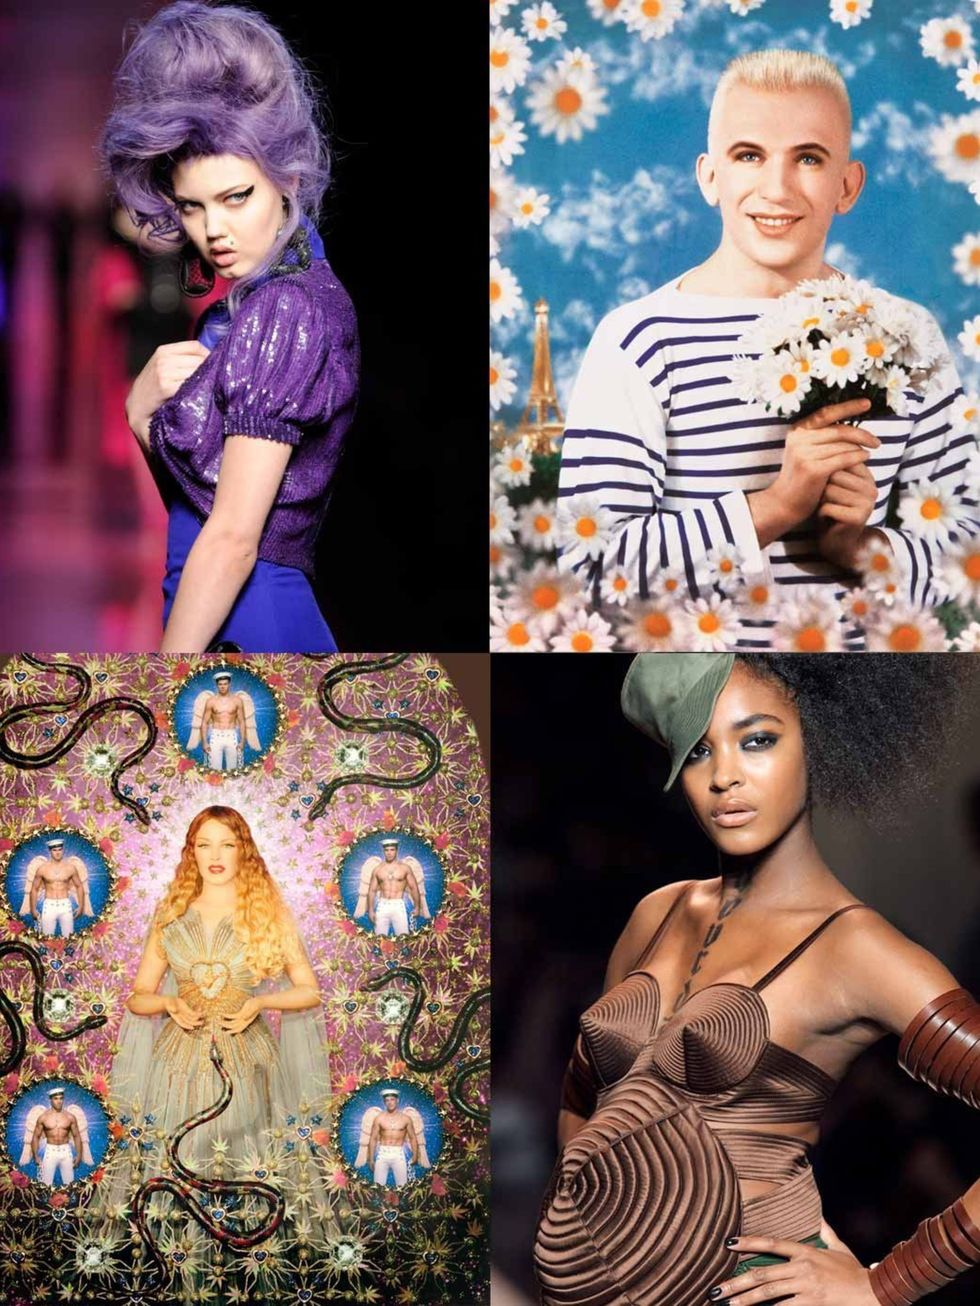 <p>The Barbican's new exhibition, The Fashion World of Jean Paul Gaultier: From the Sidewalk to the Catwalk, celebrates all things JPG. In honour of its opening this week, we take a look back at some of the designer's most memorable moments...</p><p><a hr